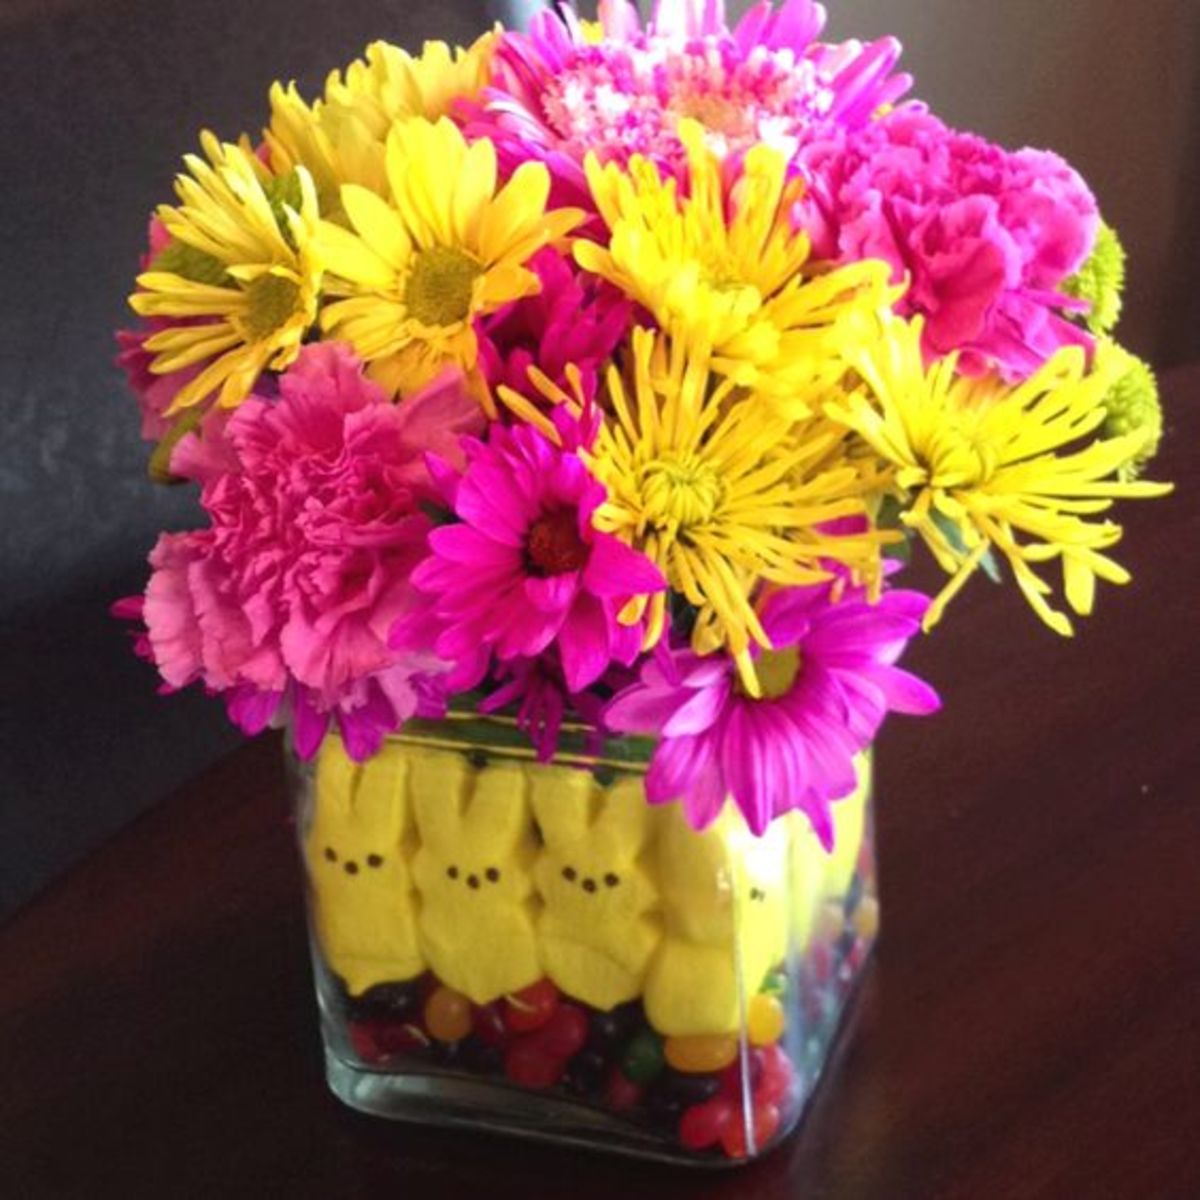 You can also mix colors—here, yellow Peeps peek out from beneath pink and yellow flowers.